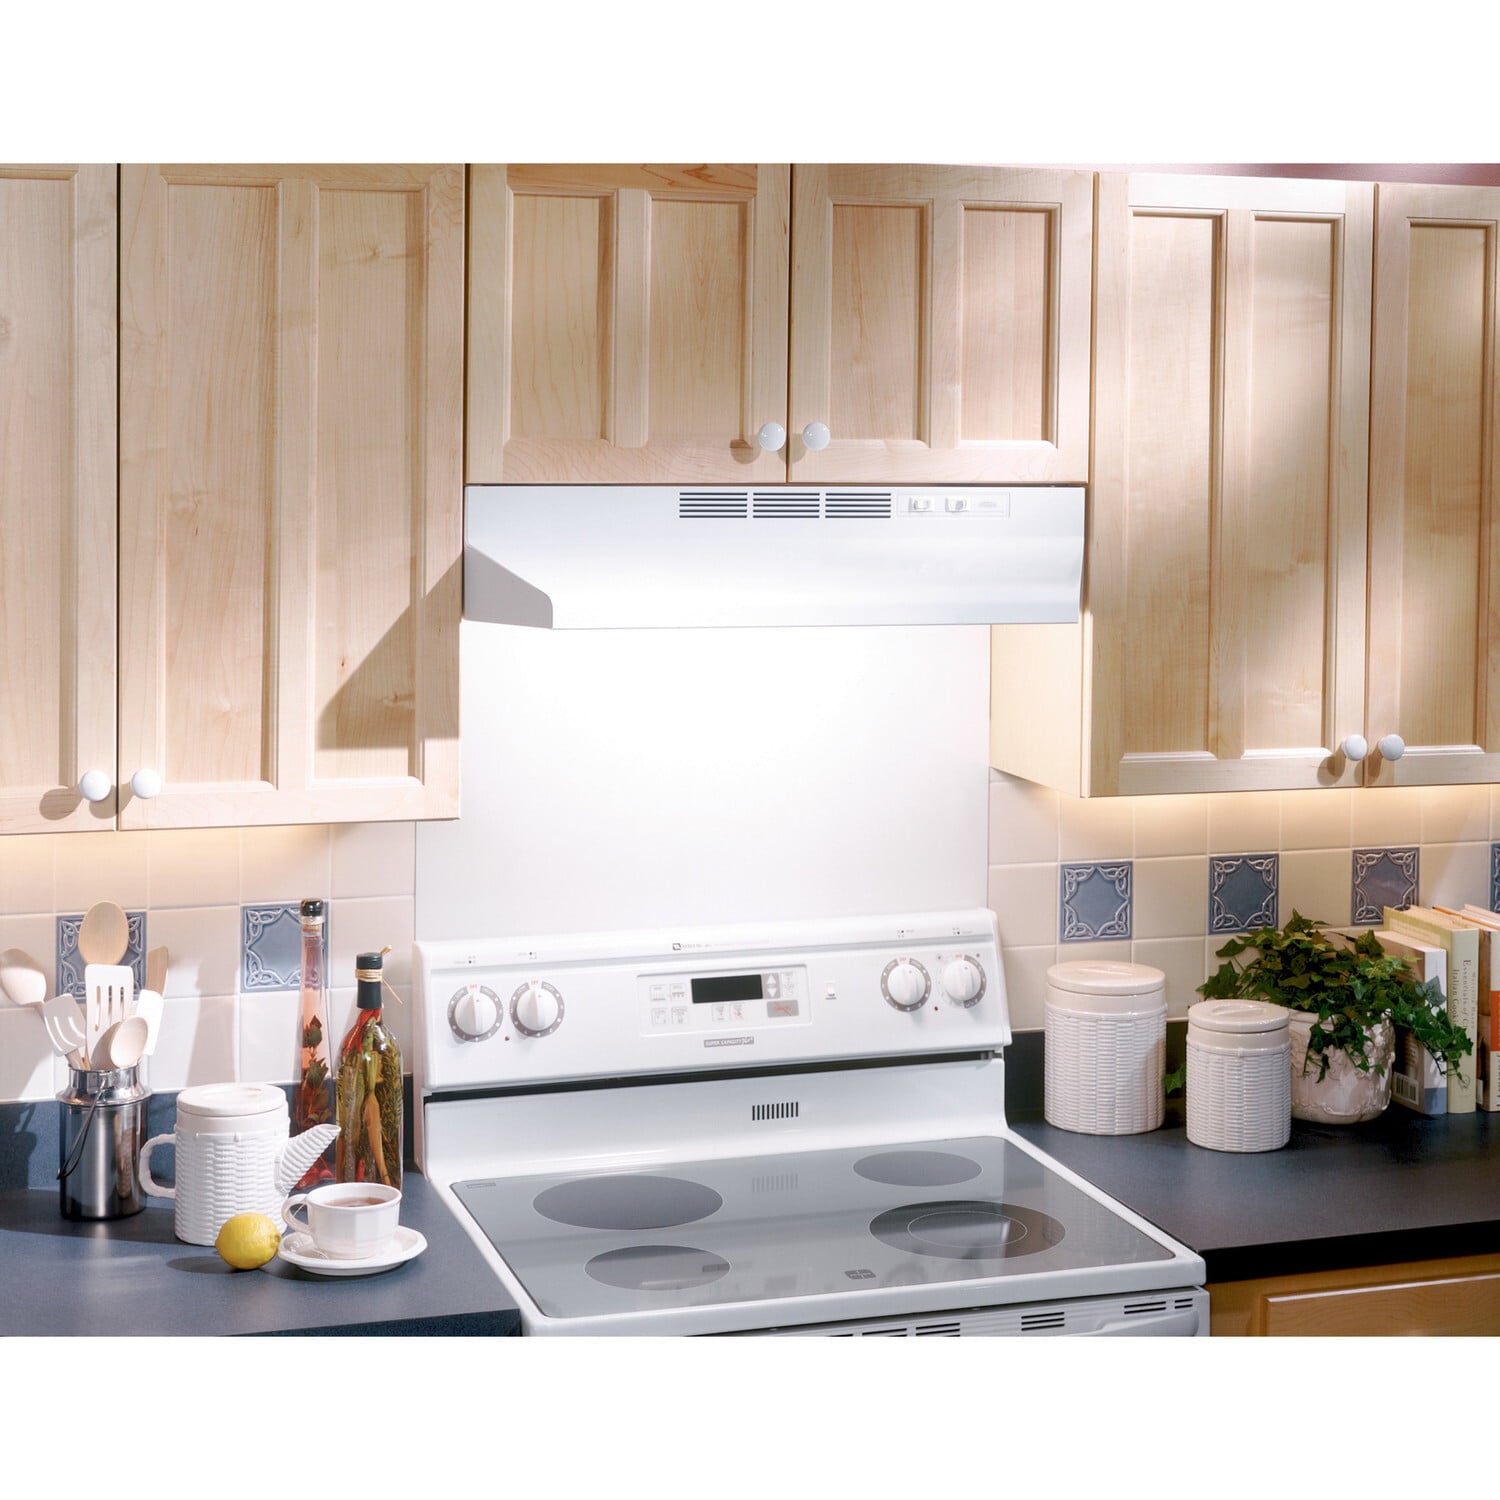 Broan BUEZ124WW Broan® 24-Inch Ductless Under-Cabinet Range Hood W/ Easy Install System, White